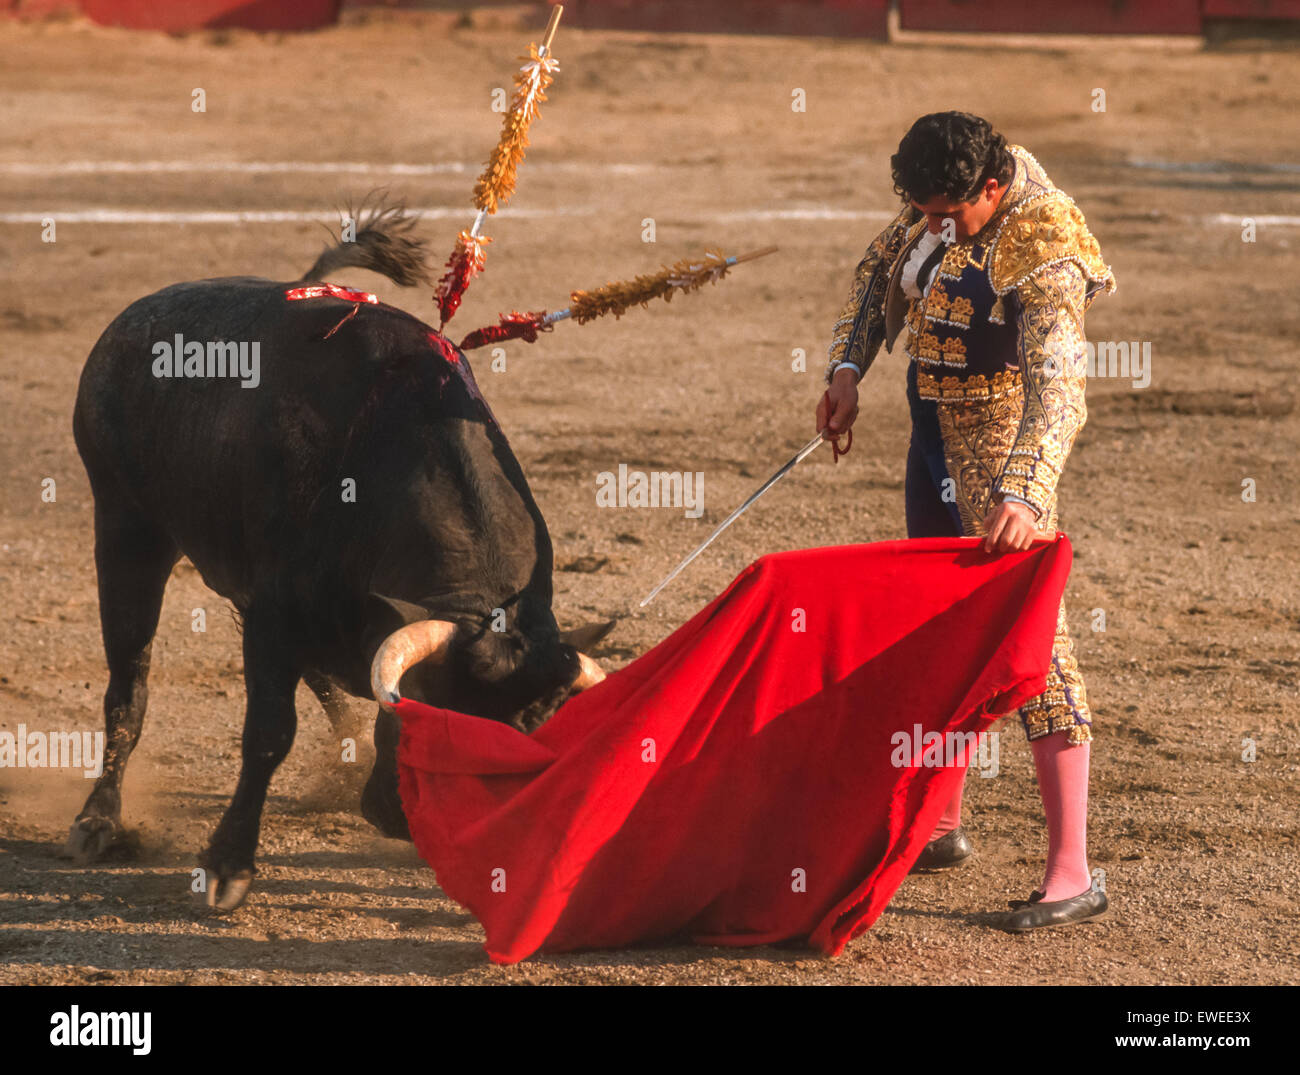 Caracas Venezuela Matador Waves Red Cape In Front Of Bull During Bullfight In Arena 19 Stock Photo Alamy